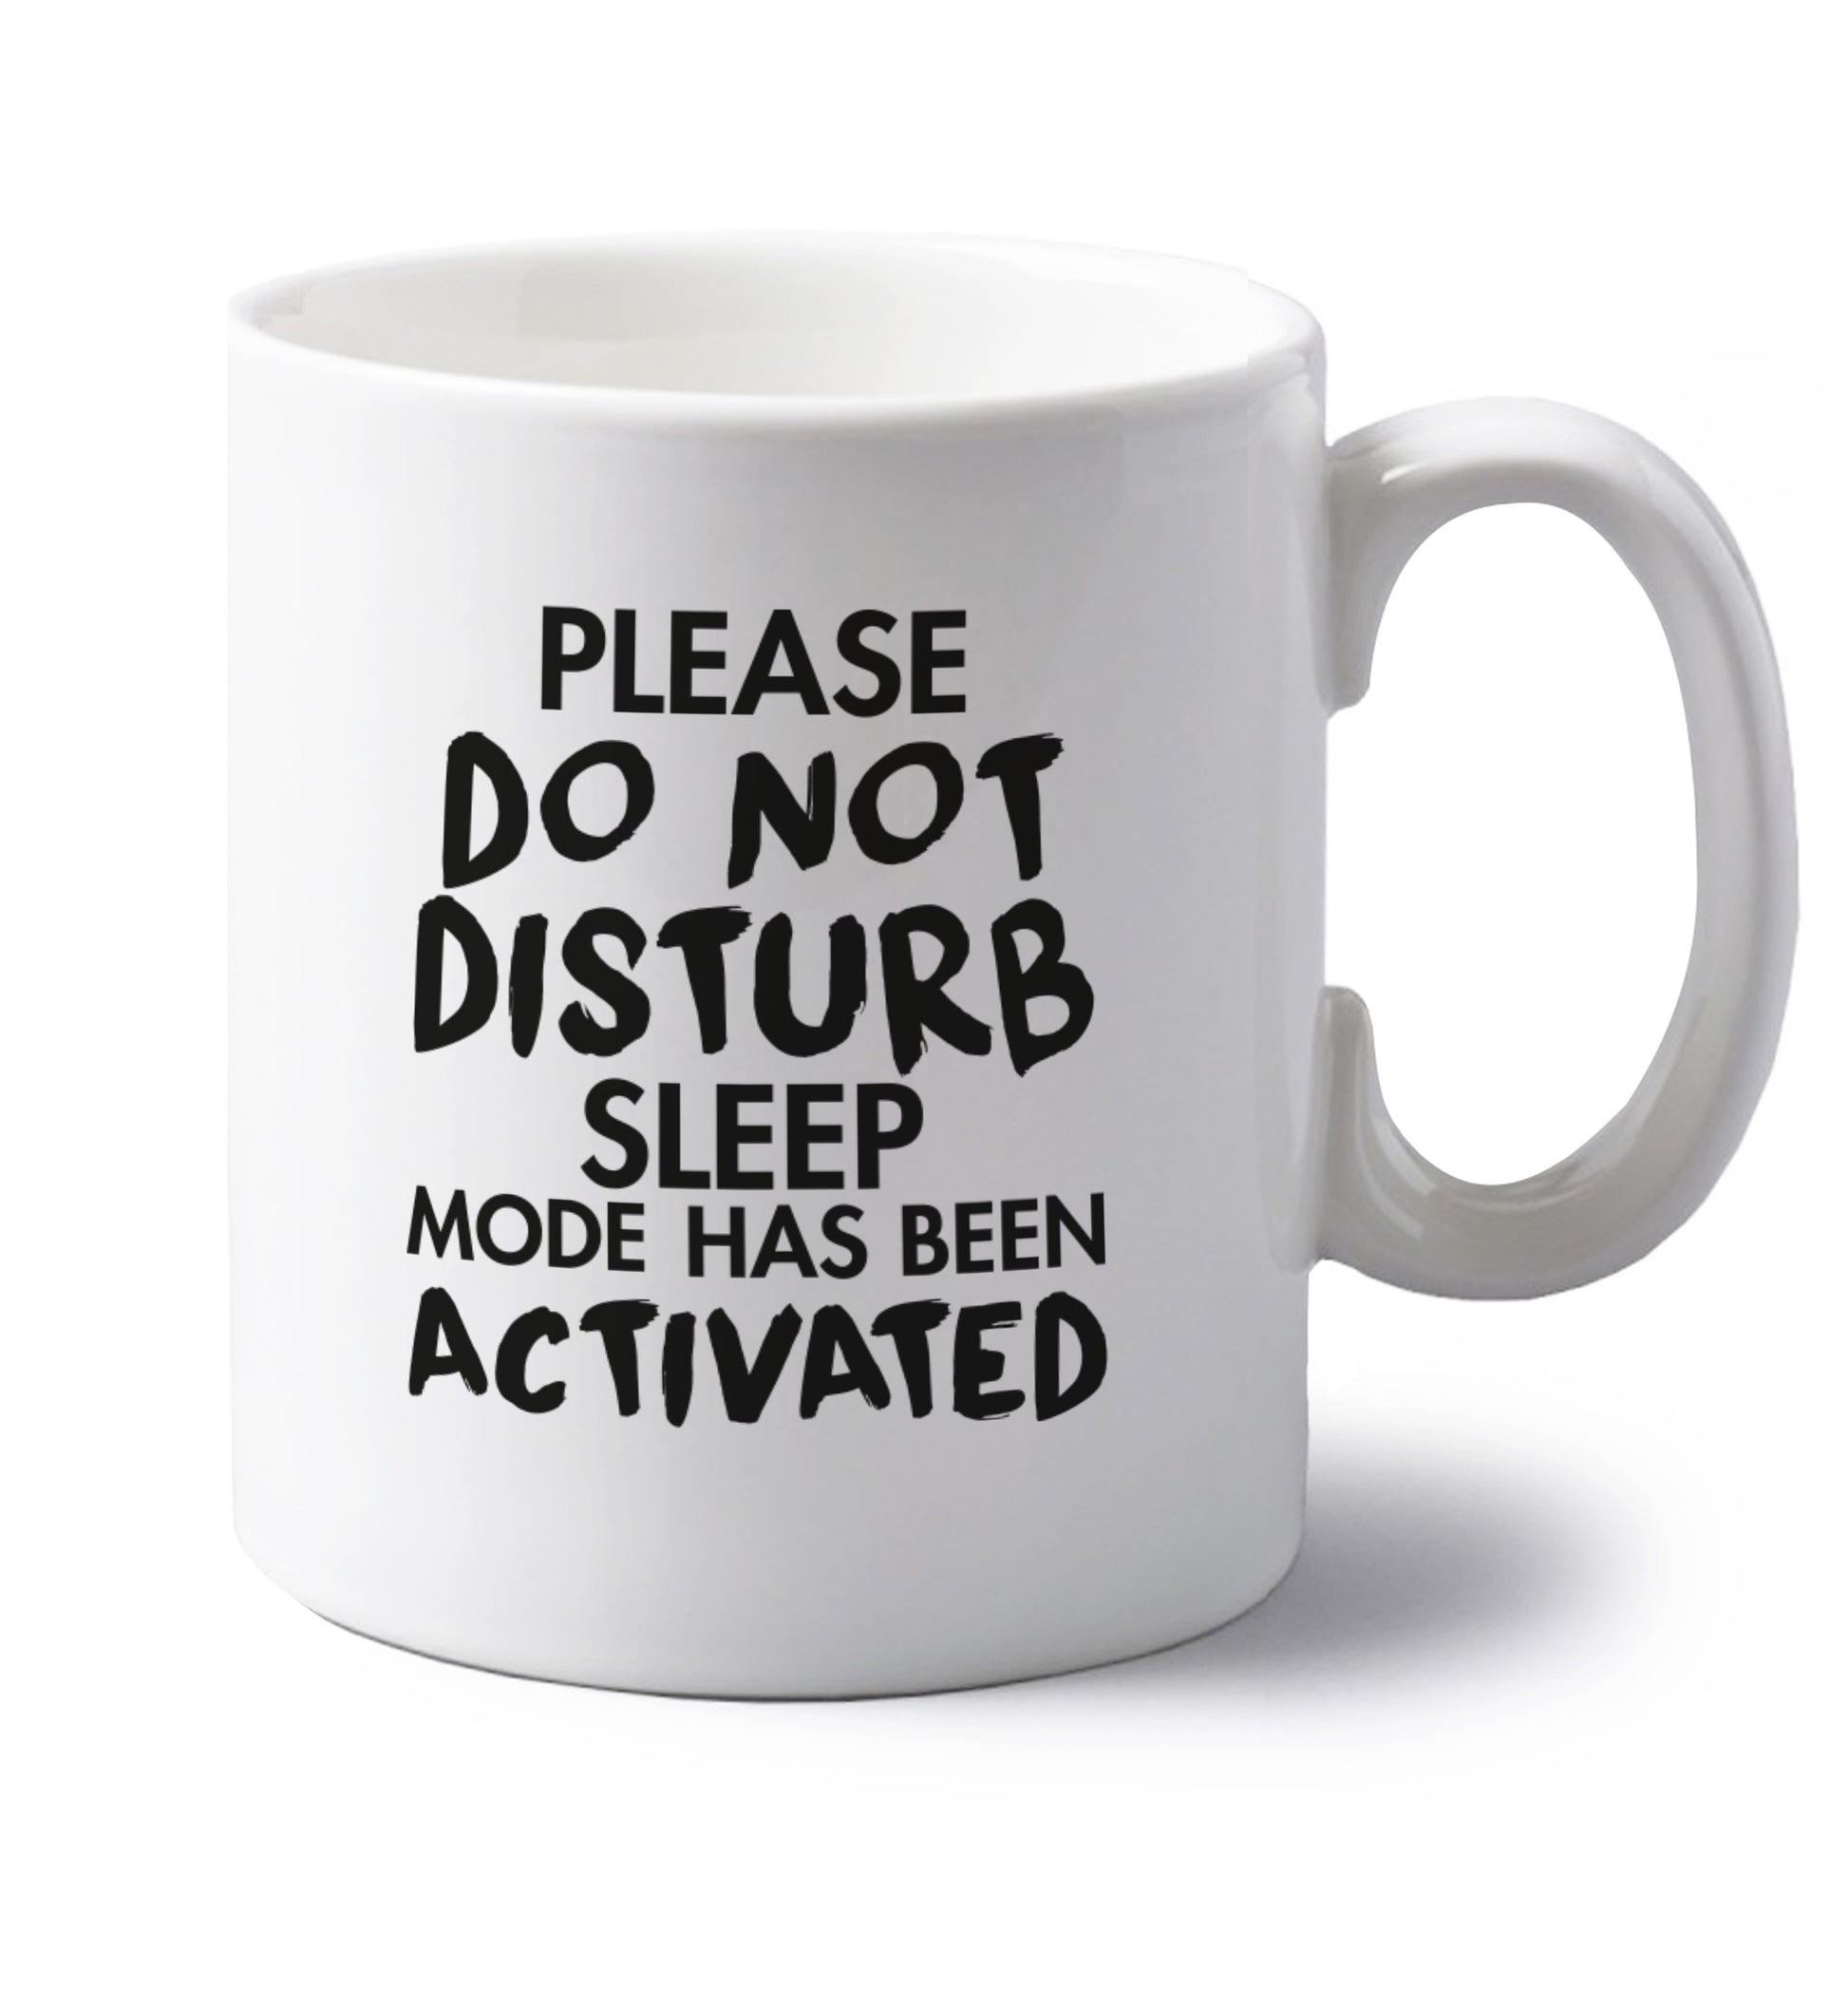 Please do not disturb sleeping mode has been activated left handed white ceramic mug 